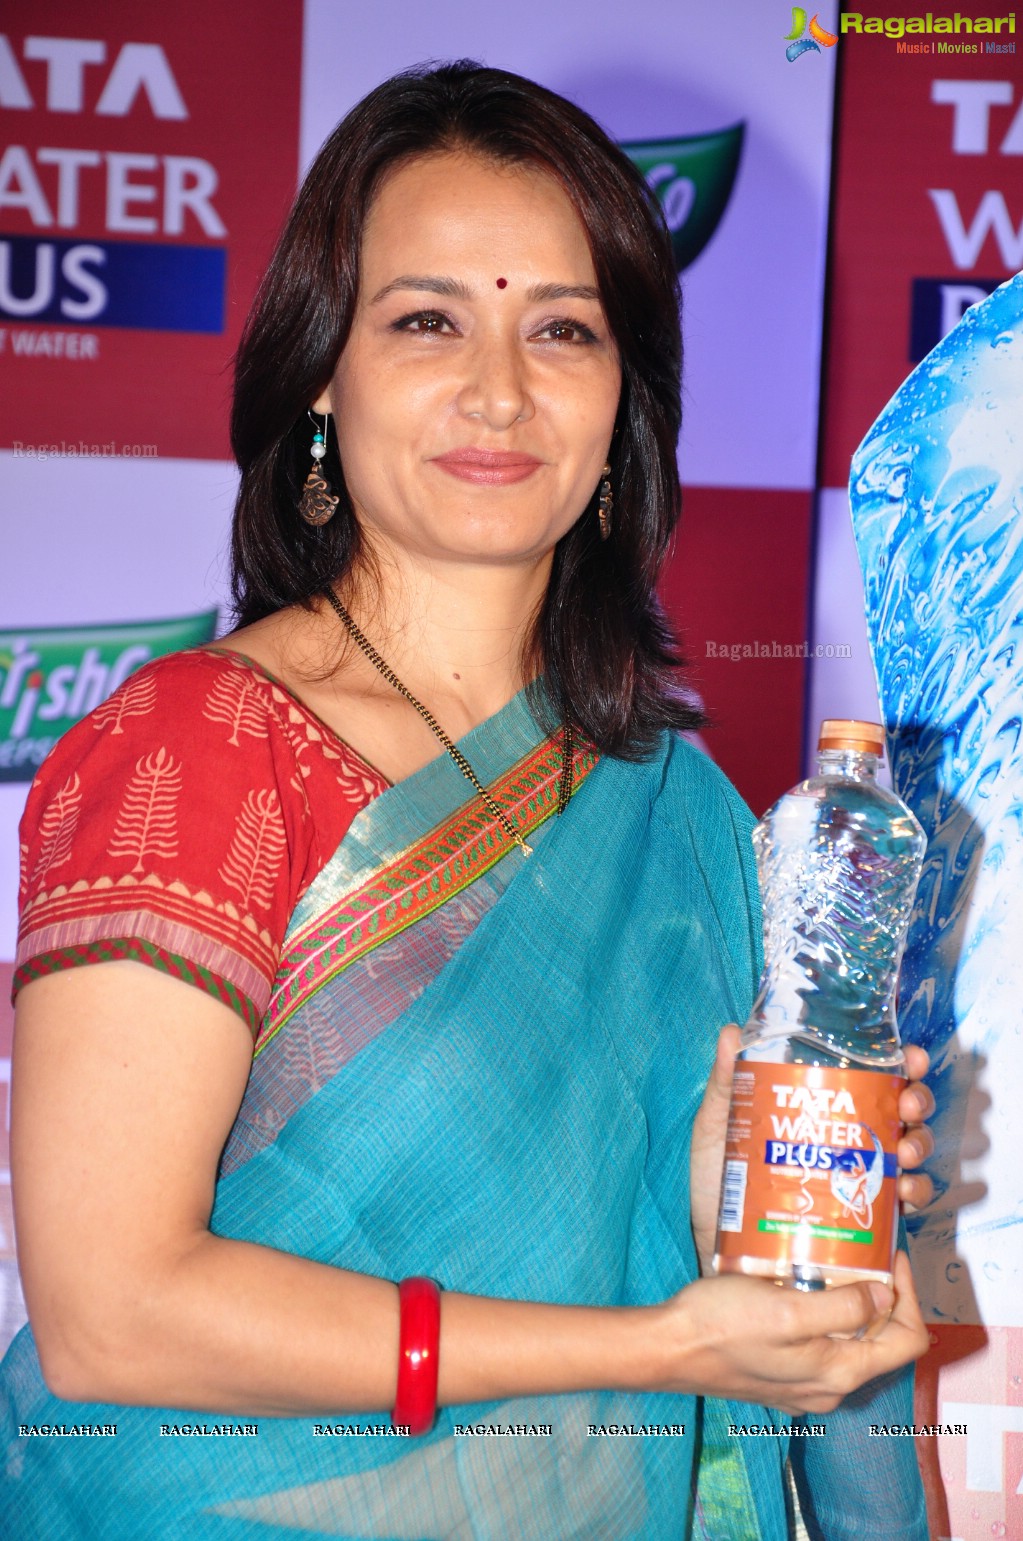 Amala Akkineni launches India's first nutrient water — Tata Water Plus